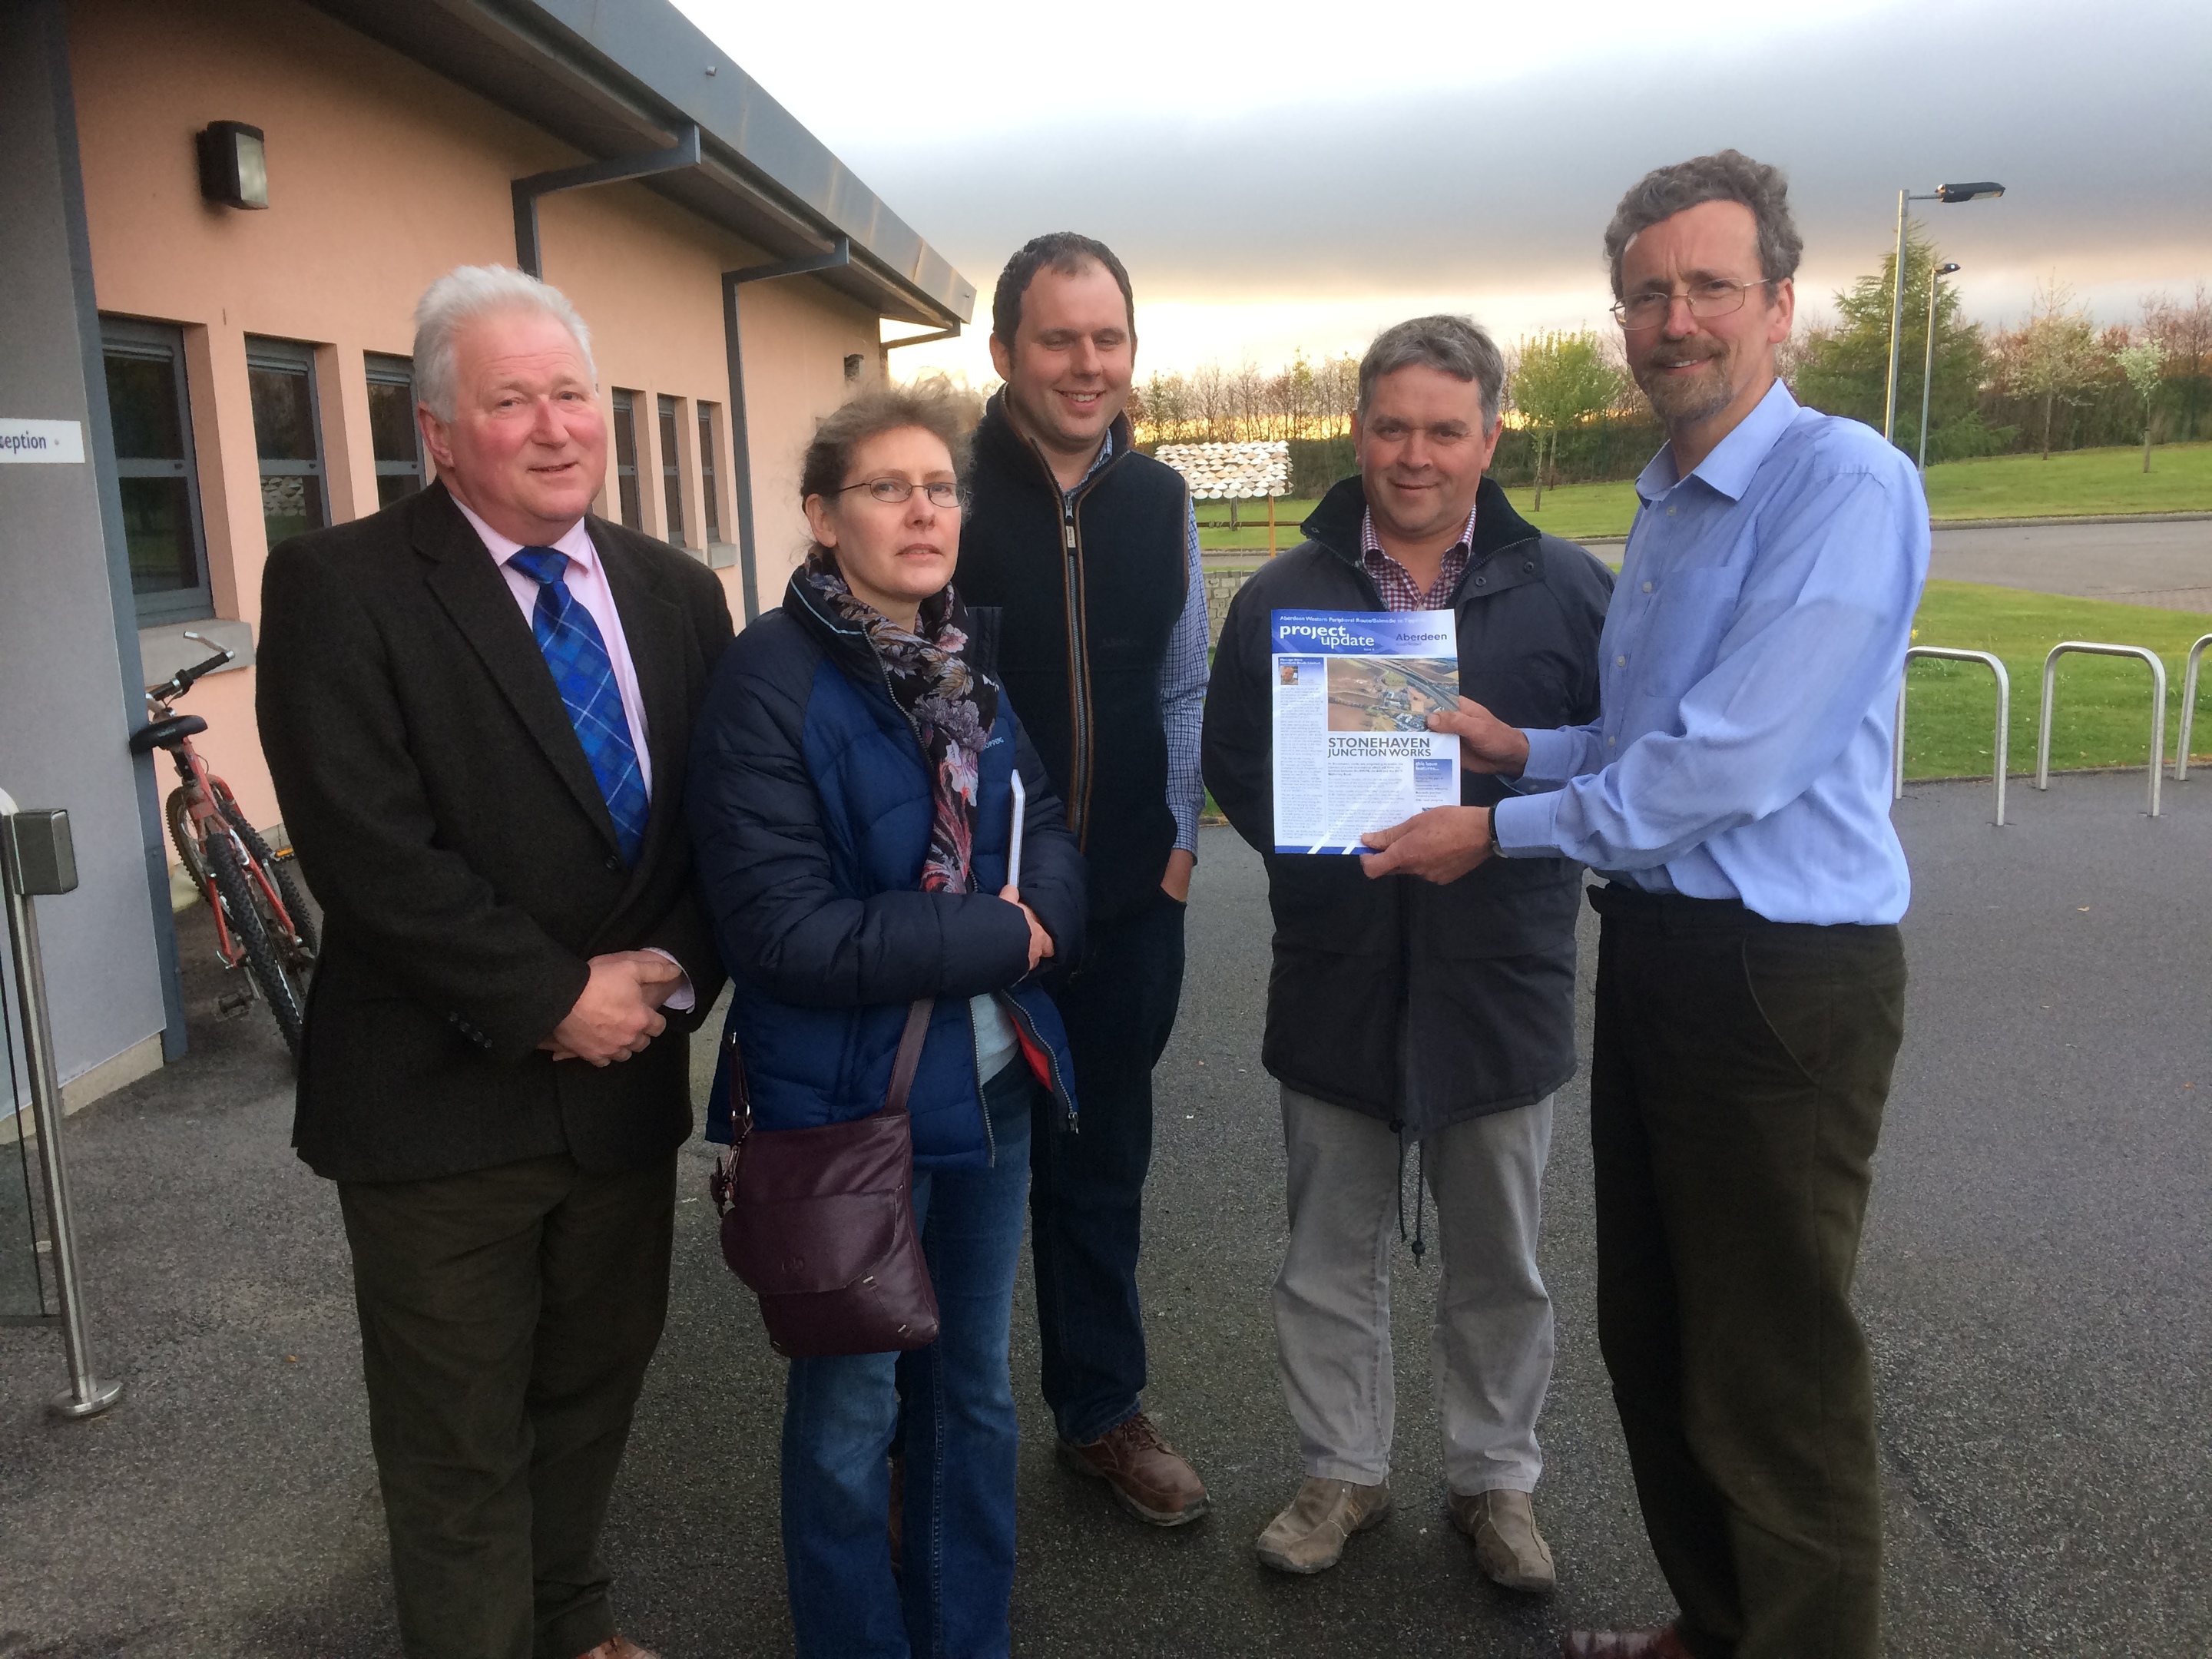 At Lairhillock School to grill transport bosses were Councillor Colin Pike, Pamela Reid of Maryculter, Scott Telford of Cookney, Scott Smith of Charleston and Henry Irvine-Fortescue, North Kincardineshire Rural Community Council vice chairman.